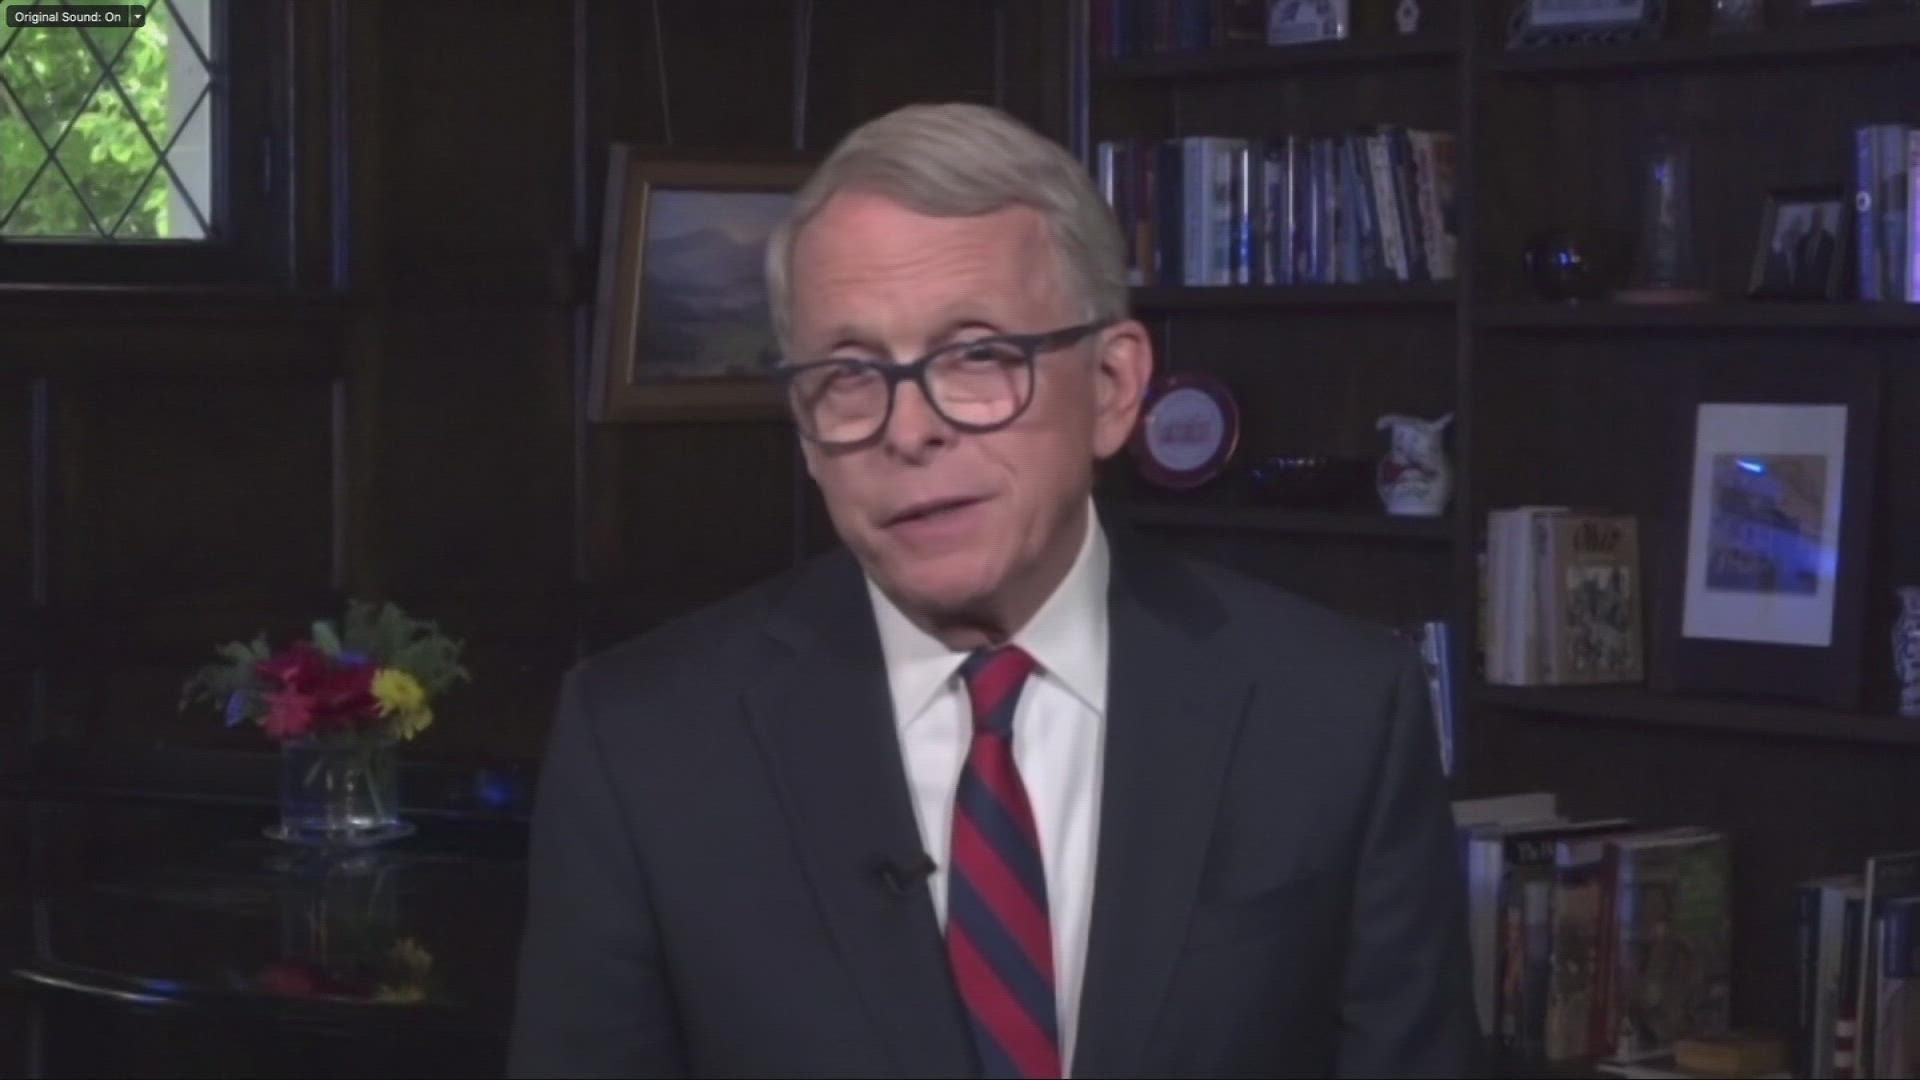 DeWine later signed an executive order directing the state health department to implement a six-week abortion ban previously passed by the state legislature.